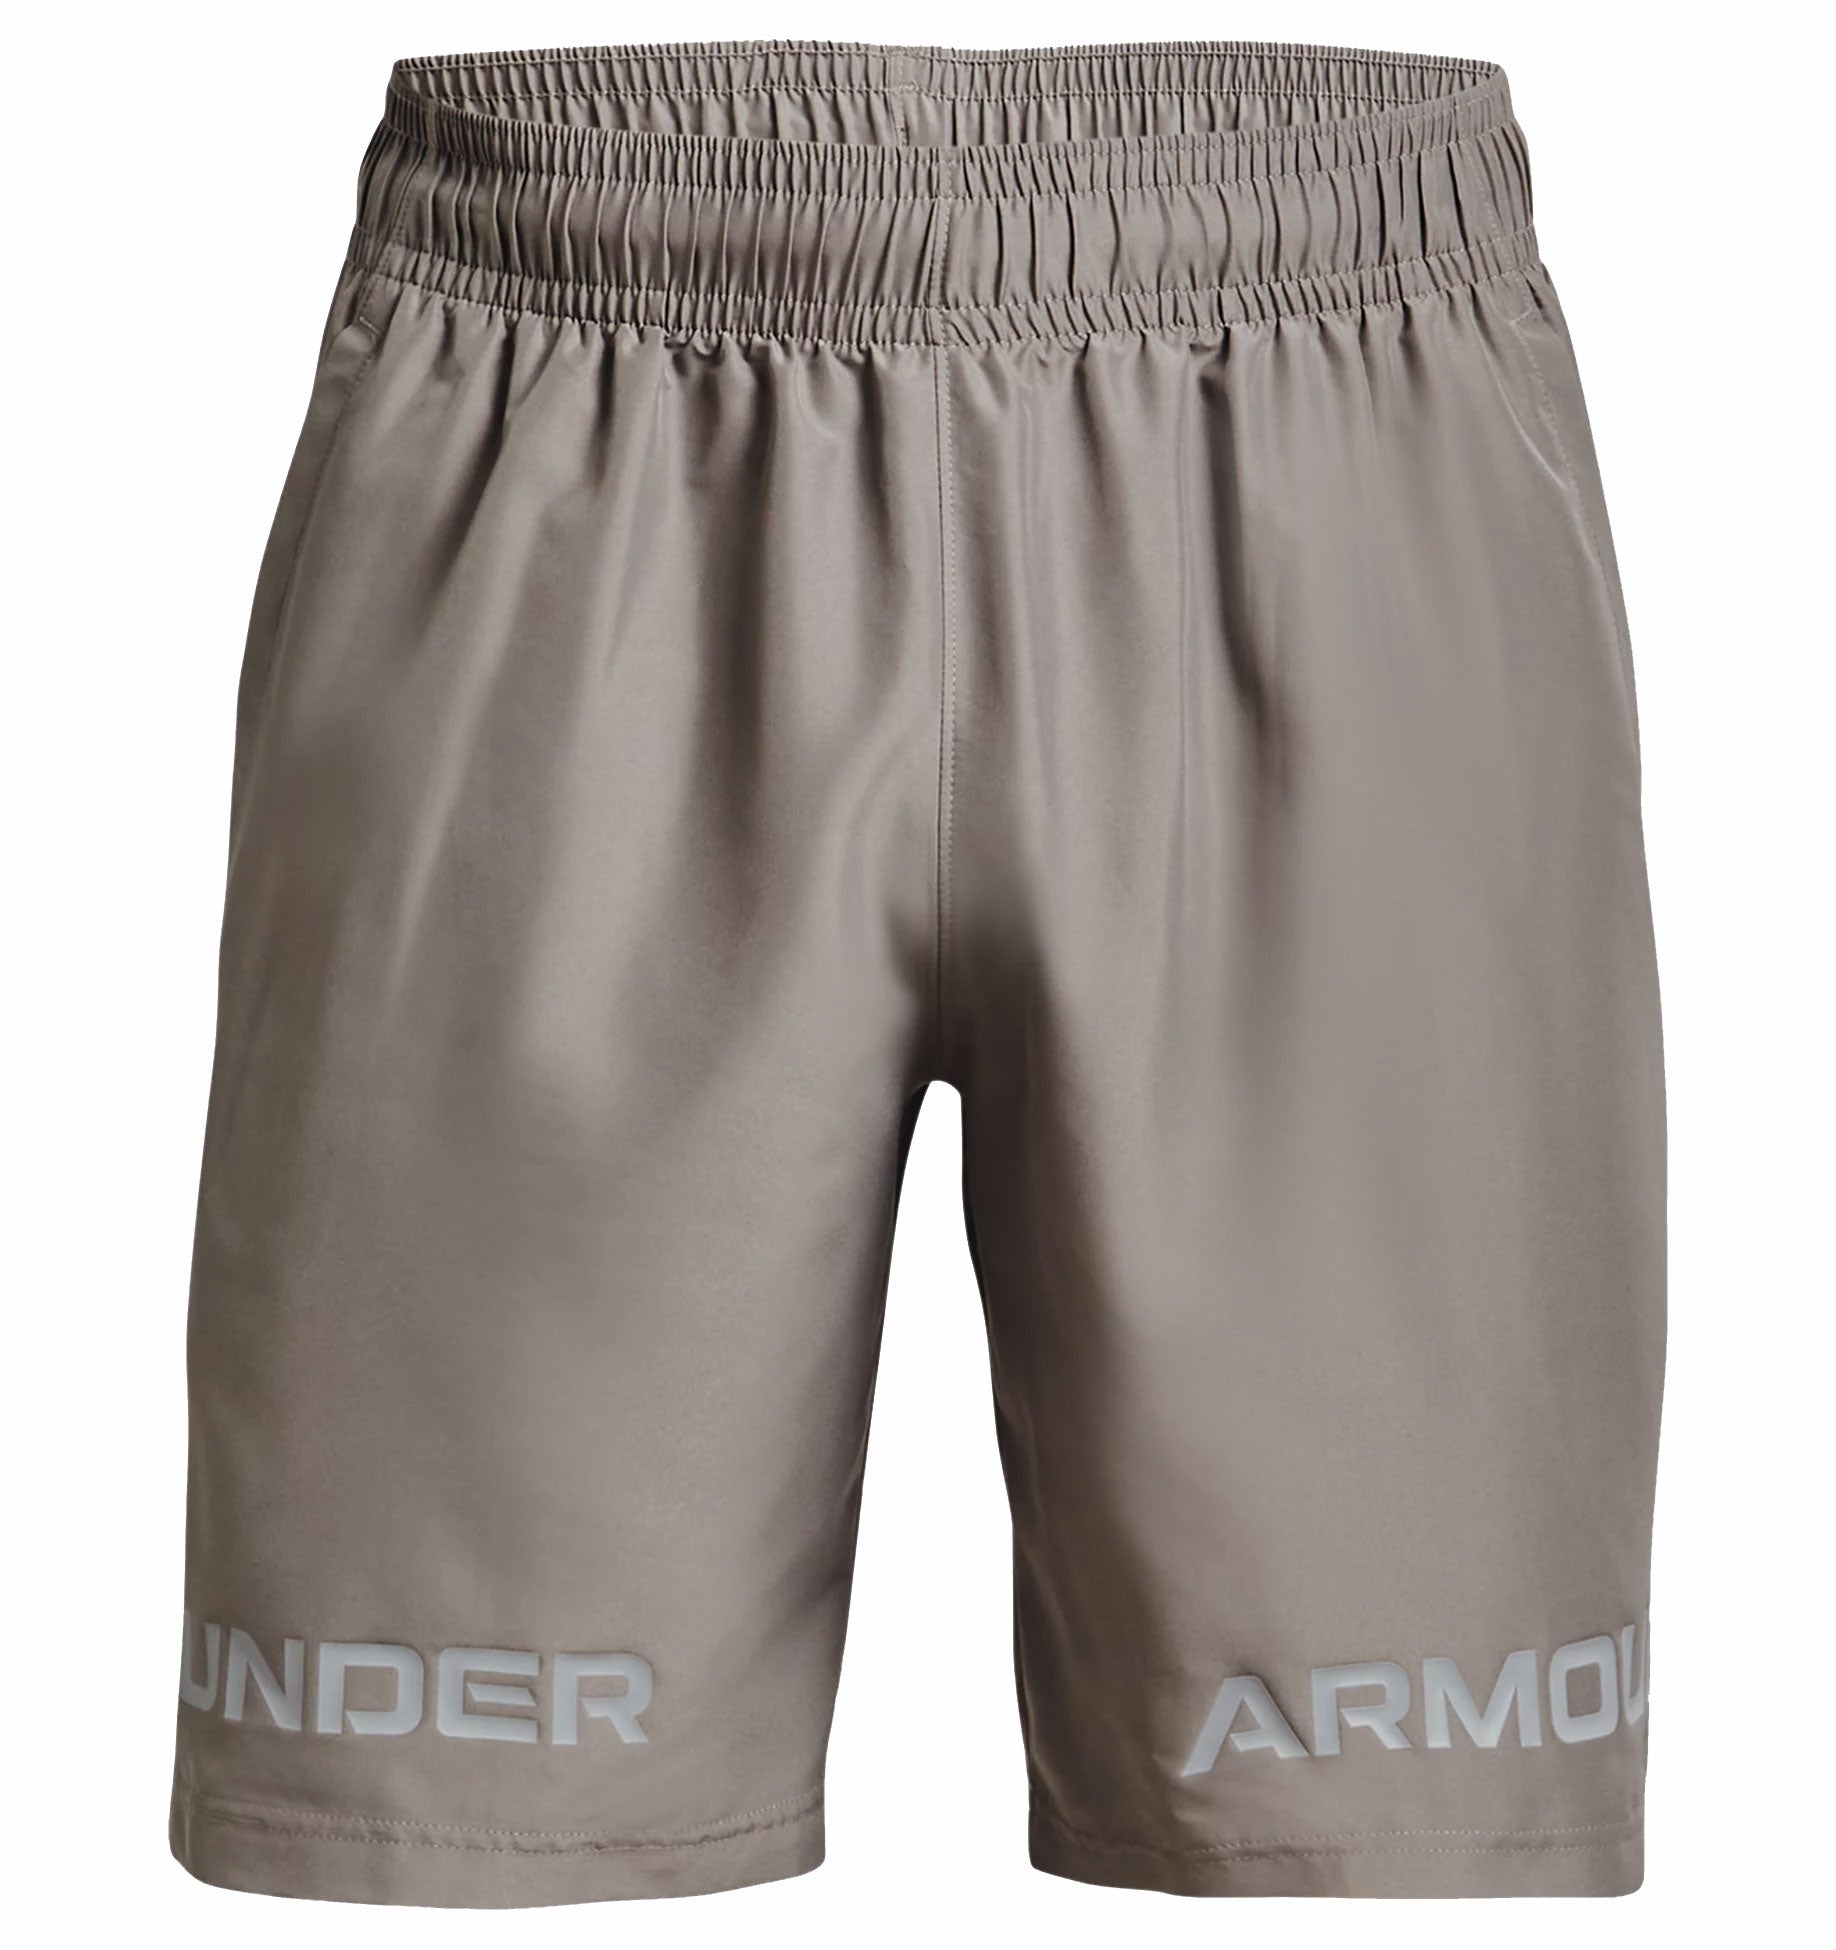 Under Armour Woven Graphic Wordmark Shorts - Mens - Pewter/Tin